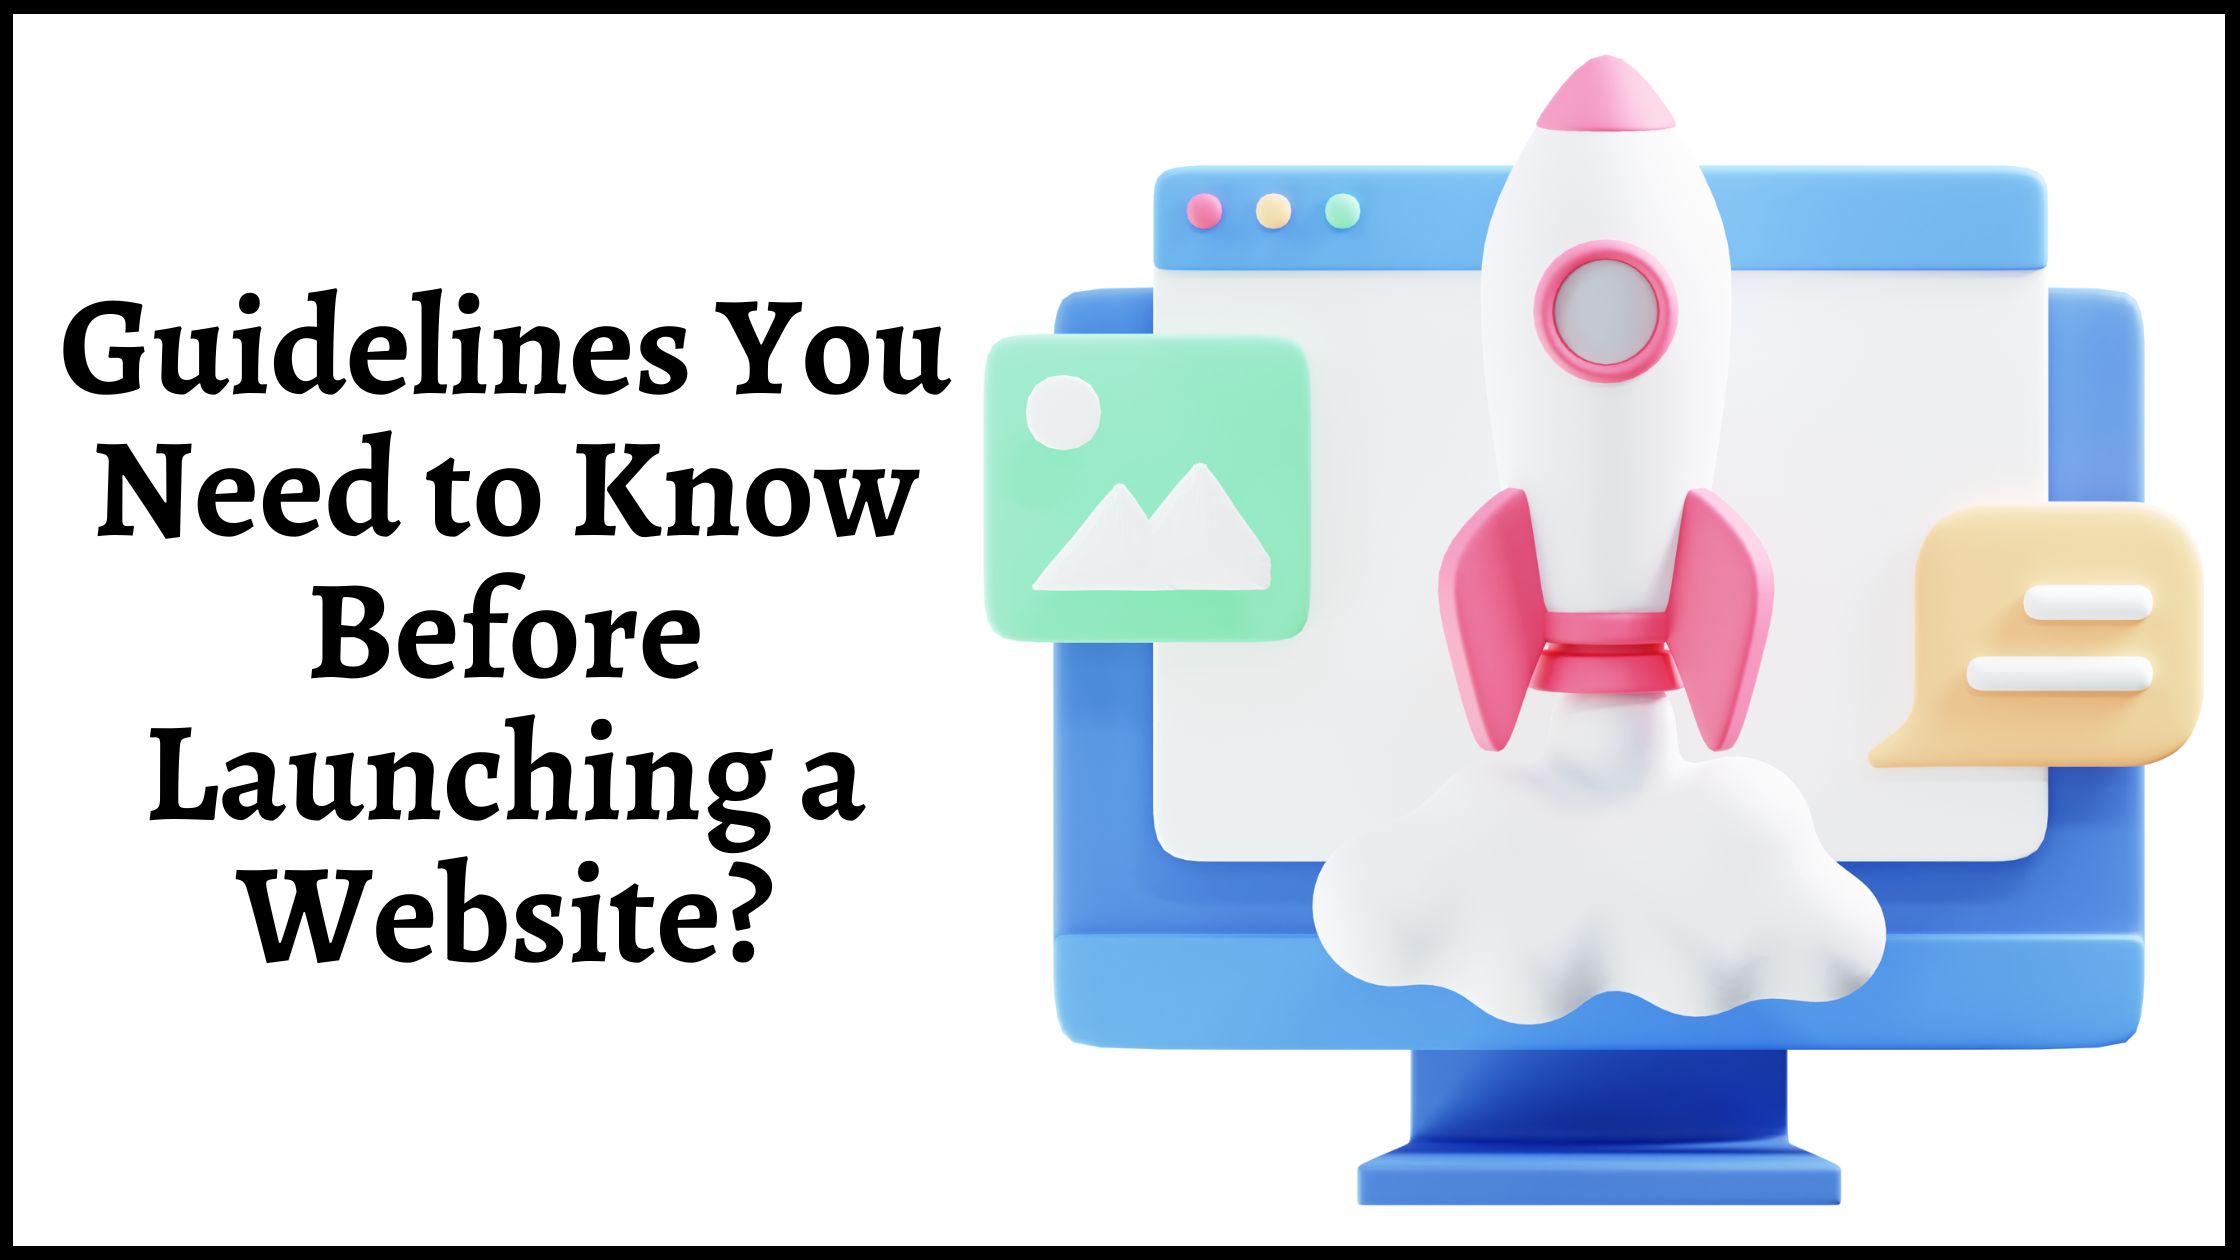 Launching a New Website? Essential Guidelines You Need to Know!